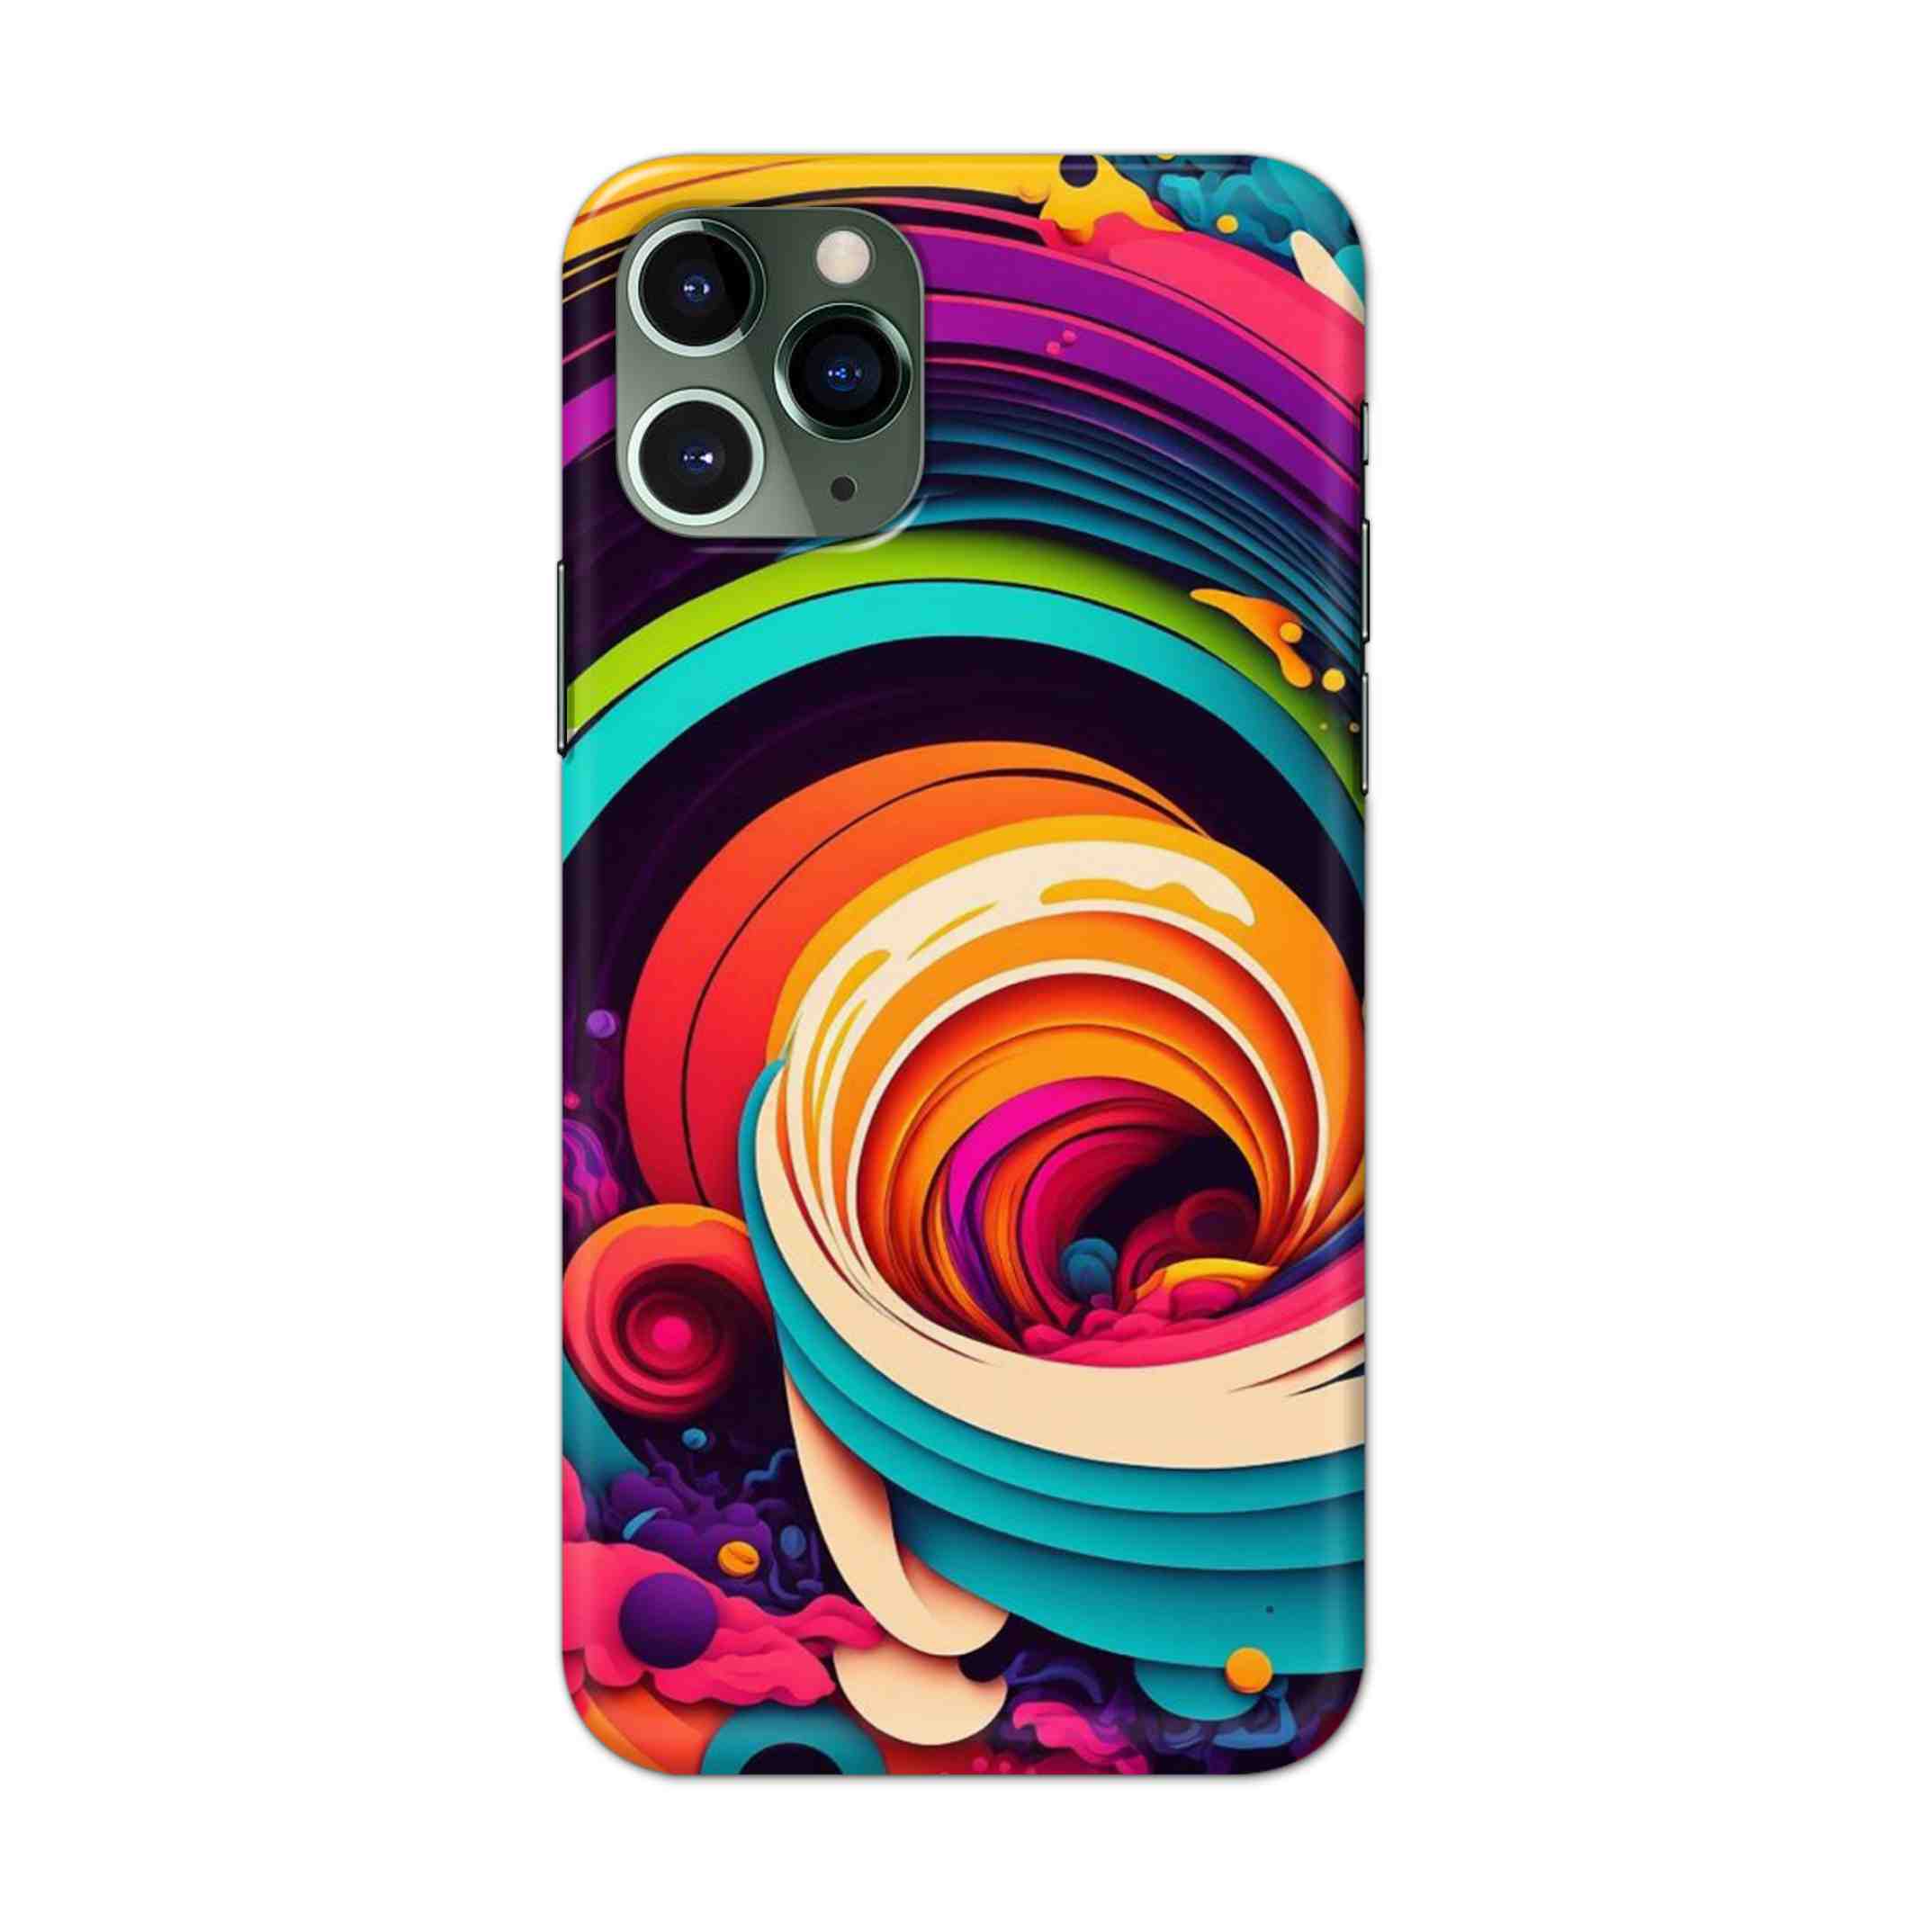 Buy Colour Circle Hard Back Mobile Phone Case/Cover For iPhone 11 Pro Online